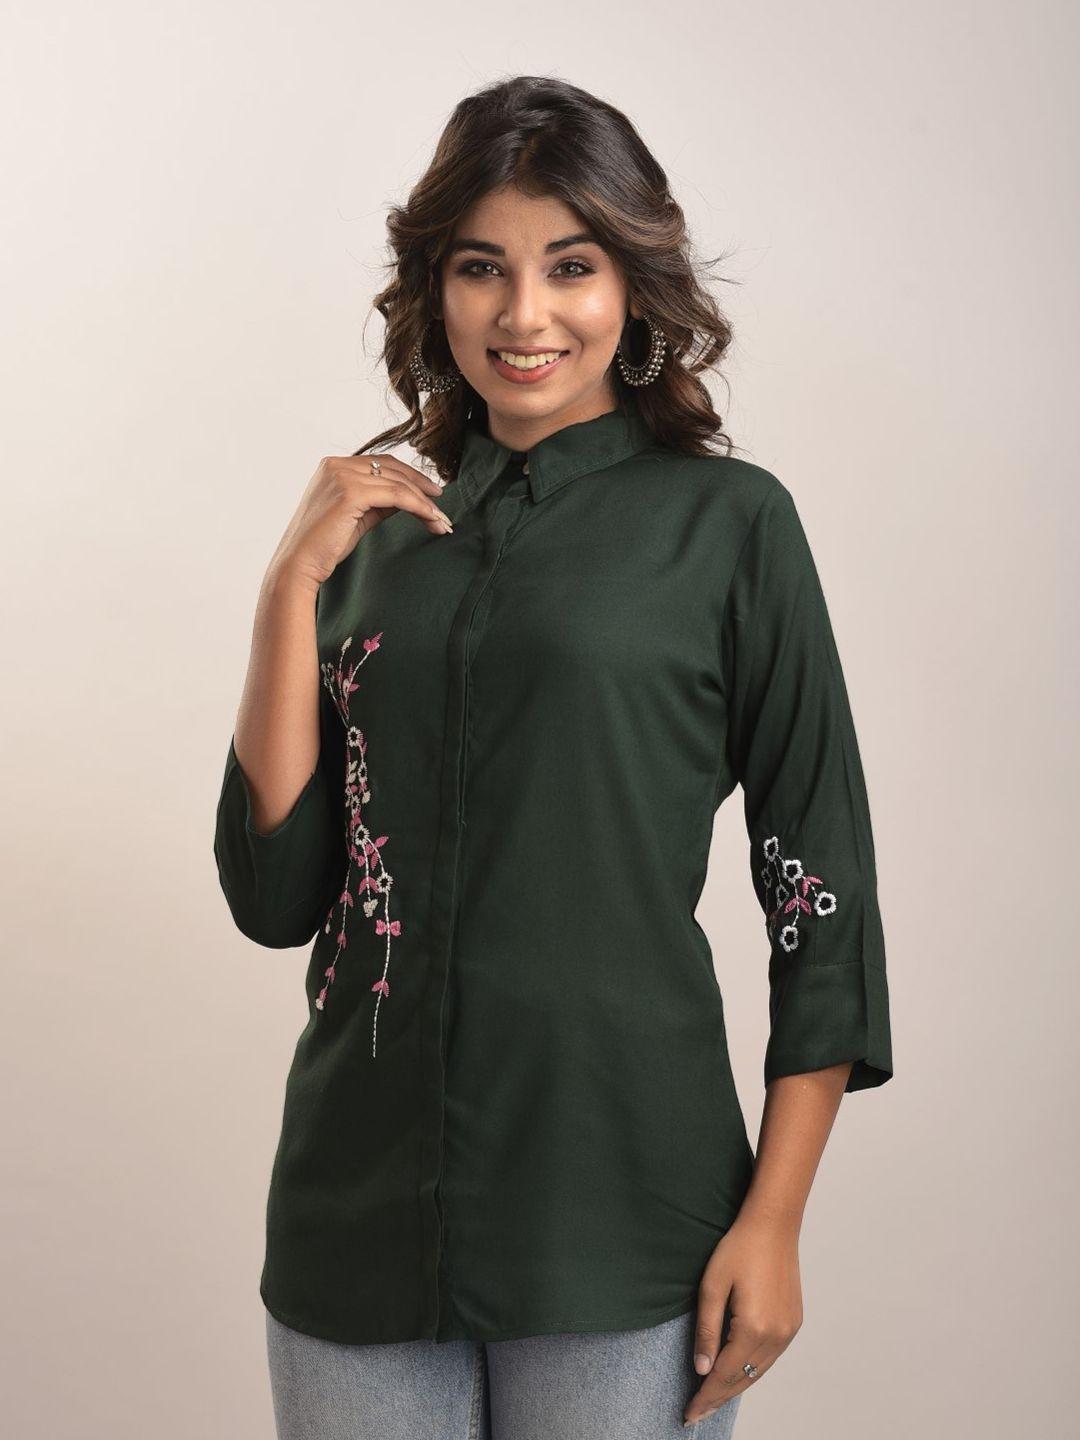 senyora green floral embroidered shirt style top